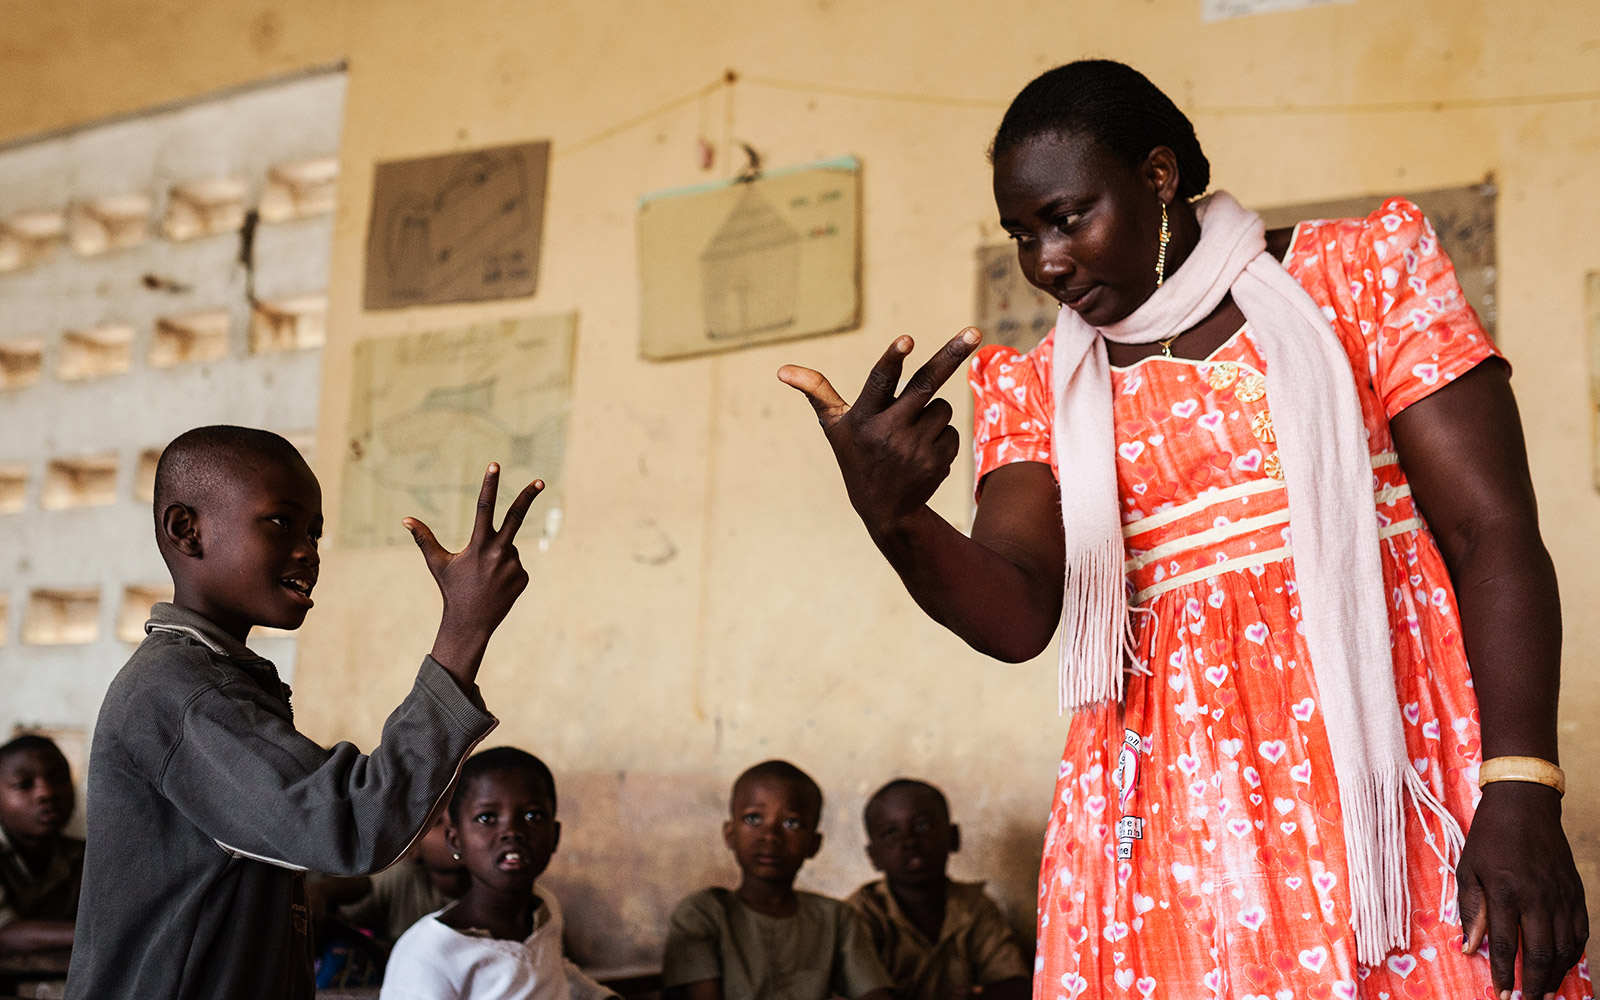 Togo, inclusive education. All children, valid or disabled, learn sign language in the classroom. Abiré, has a hearing impairment, she is included in mainstream school.